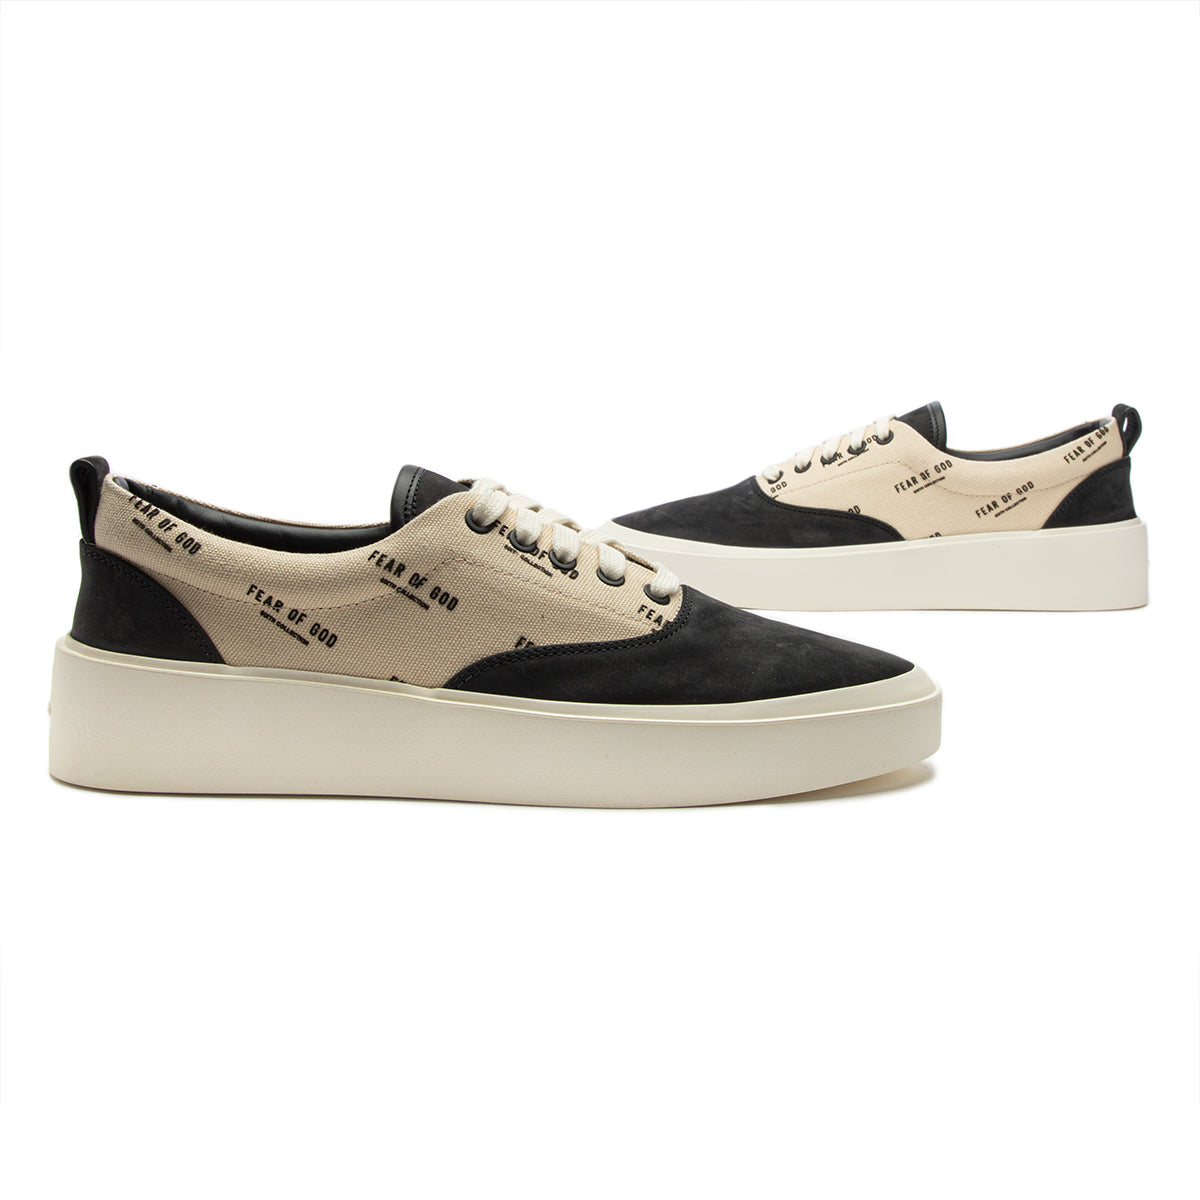 Montgomery Vil have voldsom FEAR OF GOD 101 LACE UP SNEAKER (BLACK/CREAM FEAR OF GOD PRINT) | Concepts